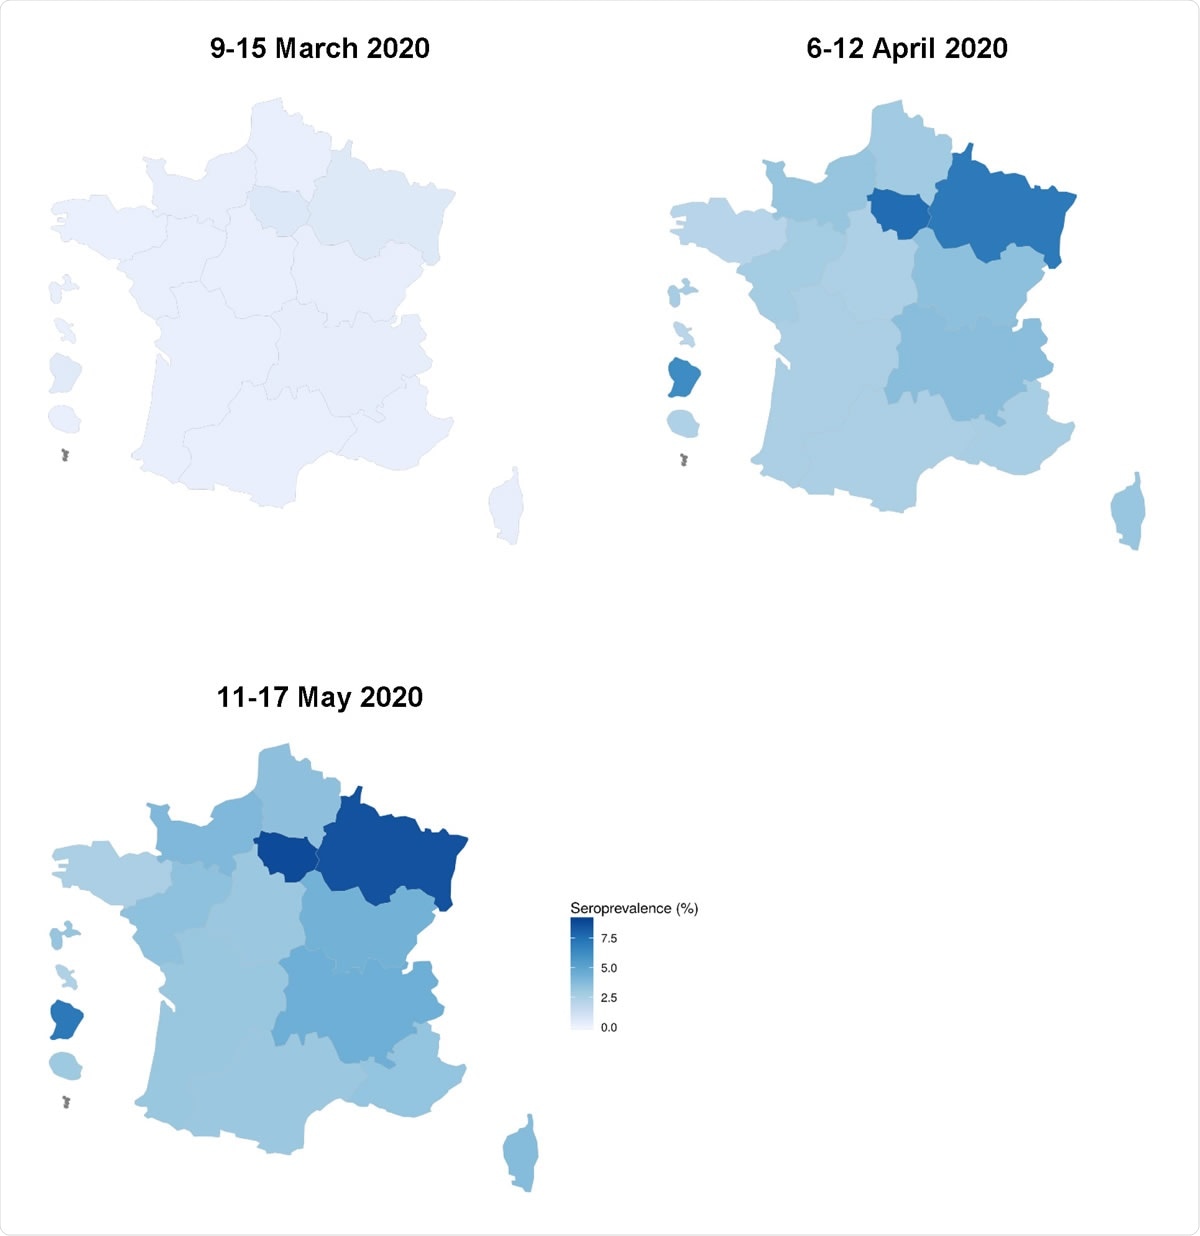 Estimated prevalence of SARS-CoV-2 antibodies in the French population by region.